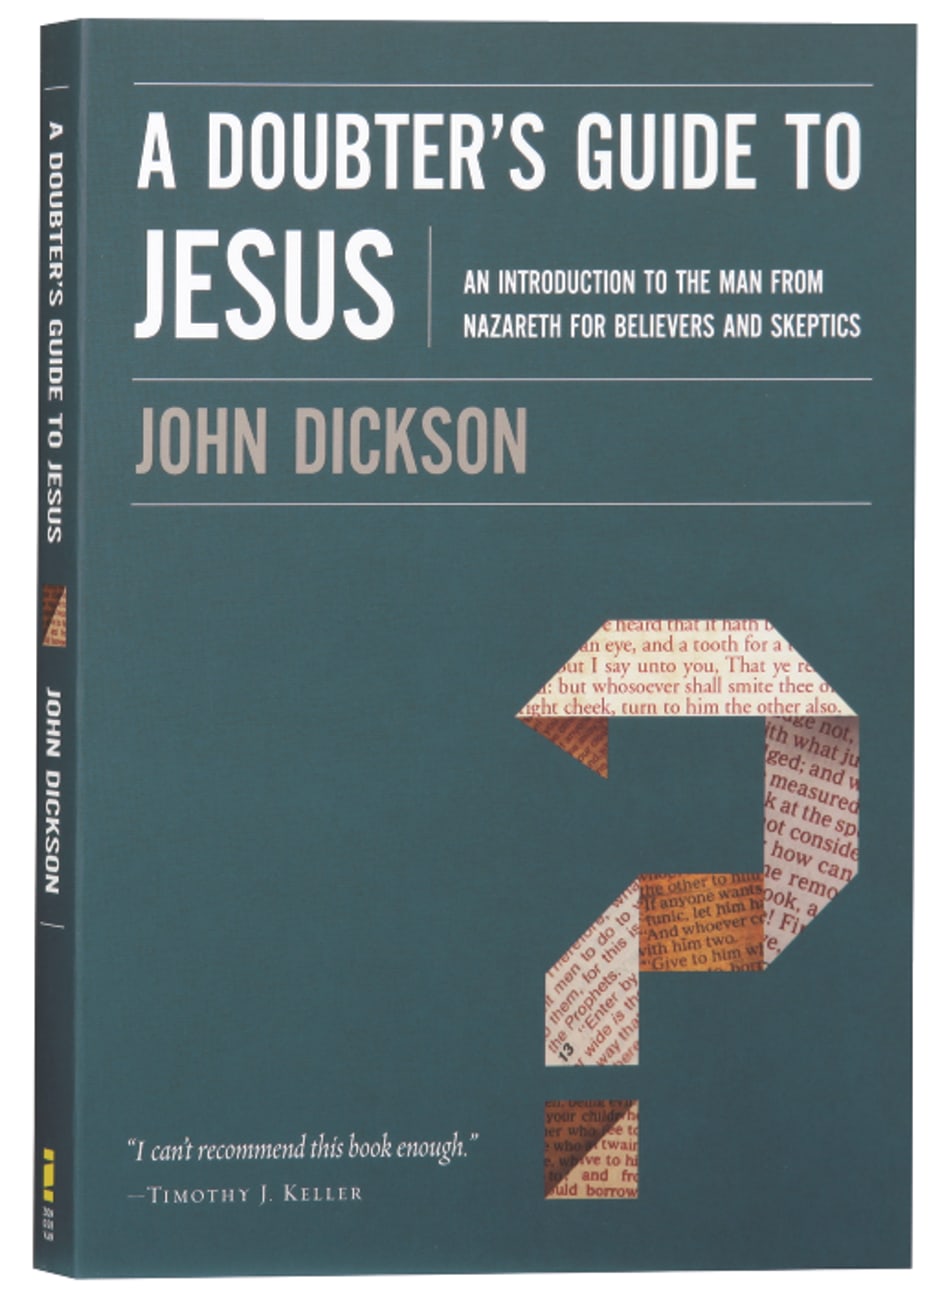 A Doubter's Guide to Jesus: An Introduction to the Man From Nazareth For Believers and Skeptics Paperback